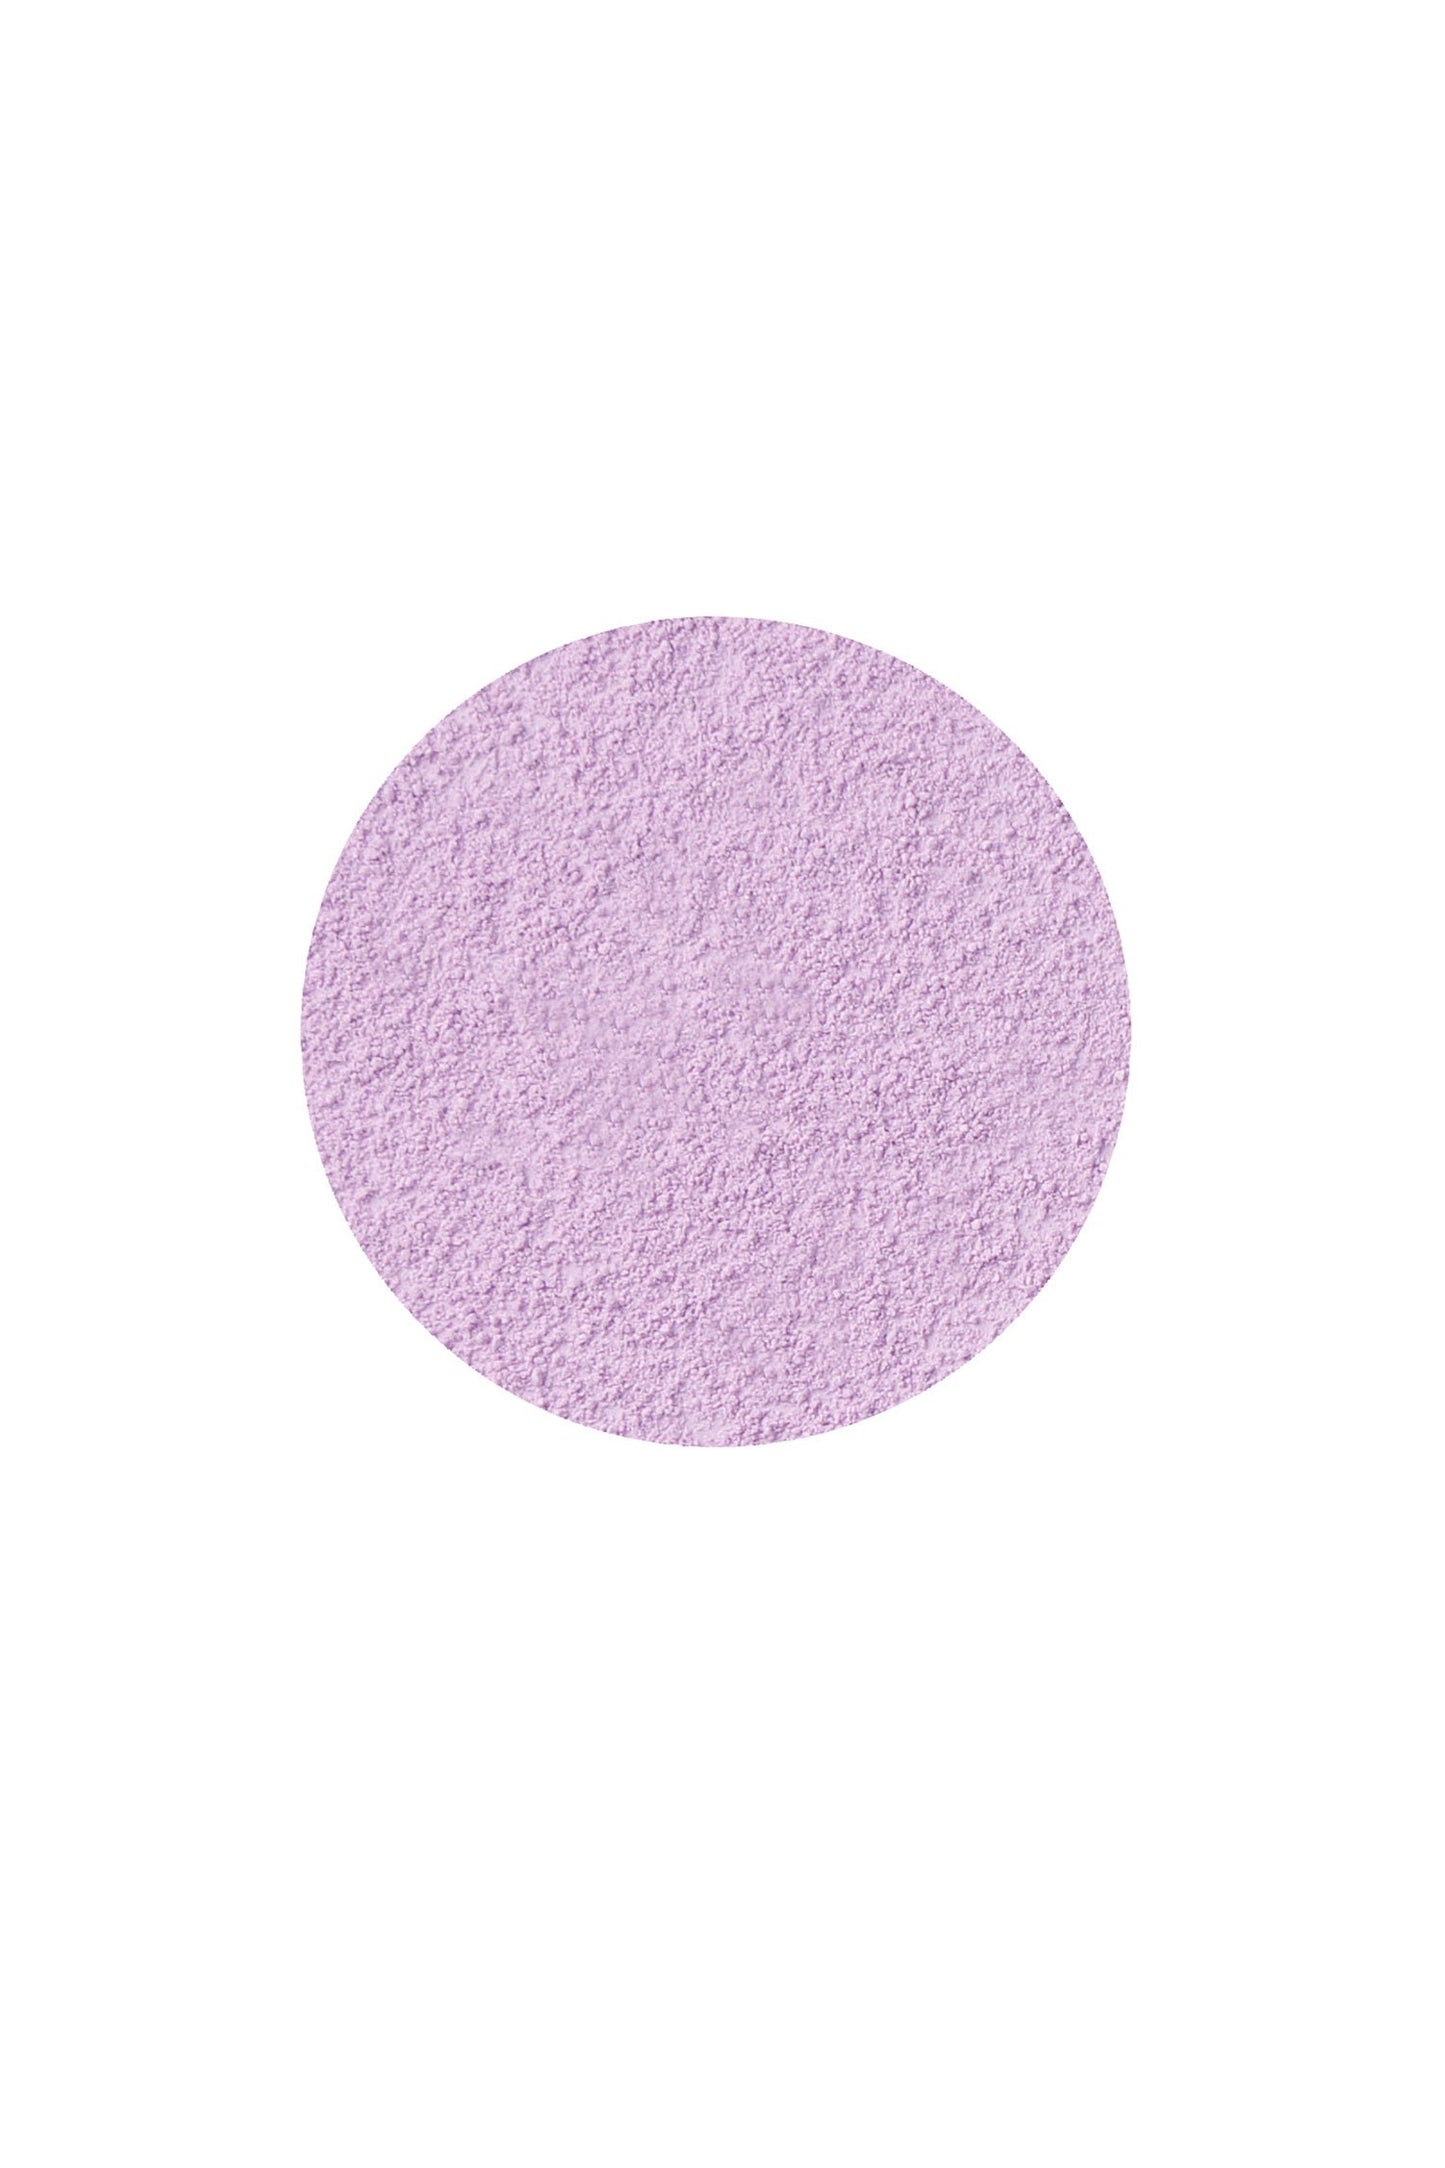 Mini Loose Light Purple Powder (Refill Only)  for portable compact case